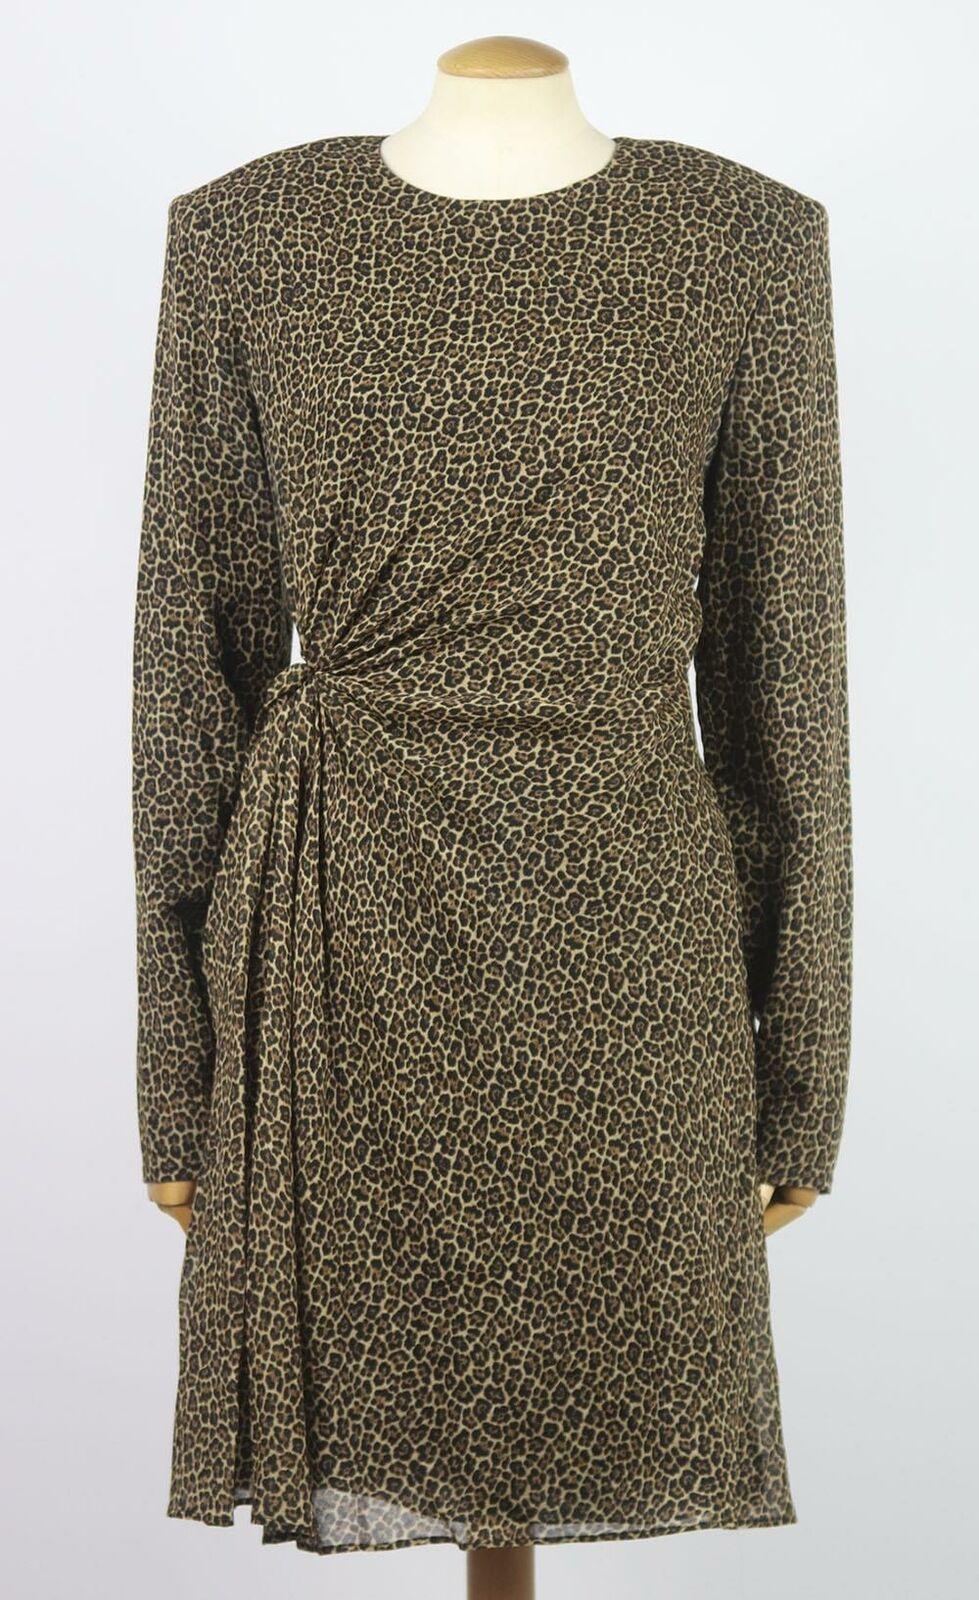 This leopard-printed dress serves as a natural extension of Saint Laurent's signature after-dark glamour, made from fine virgin wool that is almost sheer, the mini piece comes lined with a black slip and comes gathered at one side, adding definition